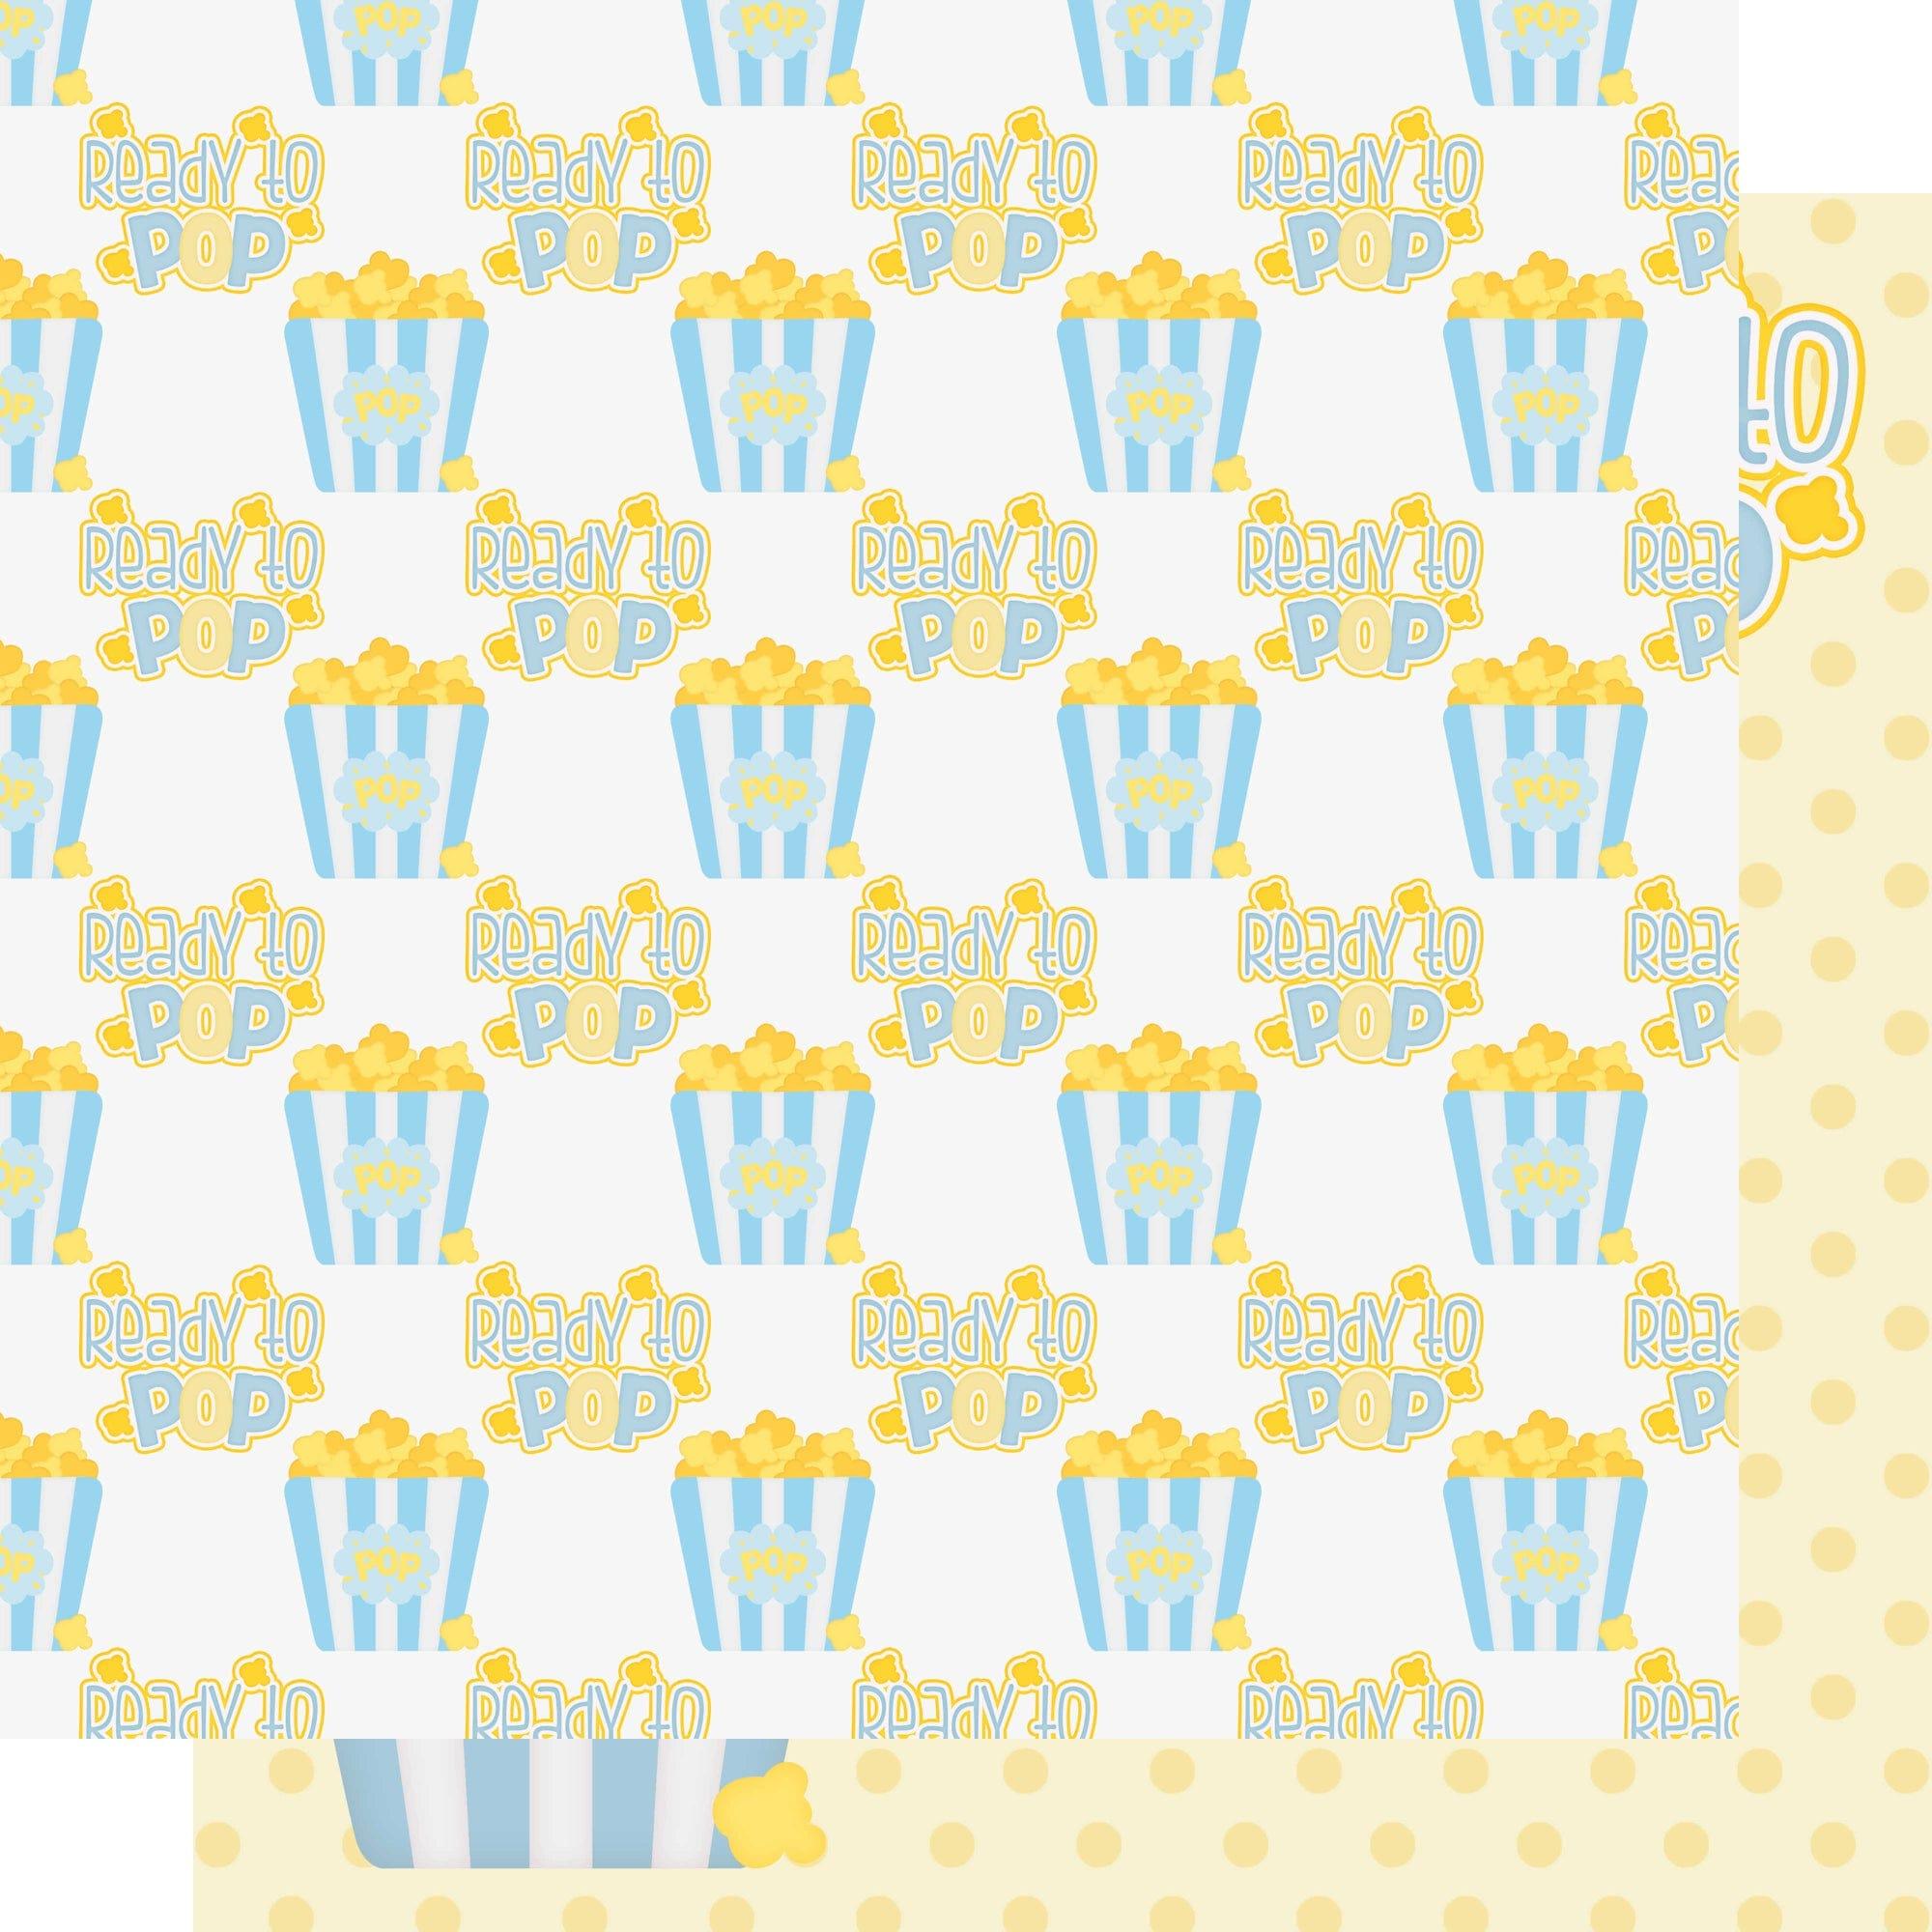 Ready To Pop Collection Ready To Pop Boy 12 x 12 Double-Sided Scrapbook Paper by SSC Designs - Scrapbook Supply Companies